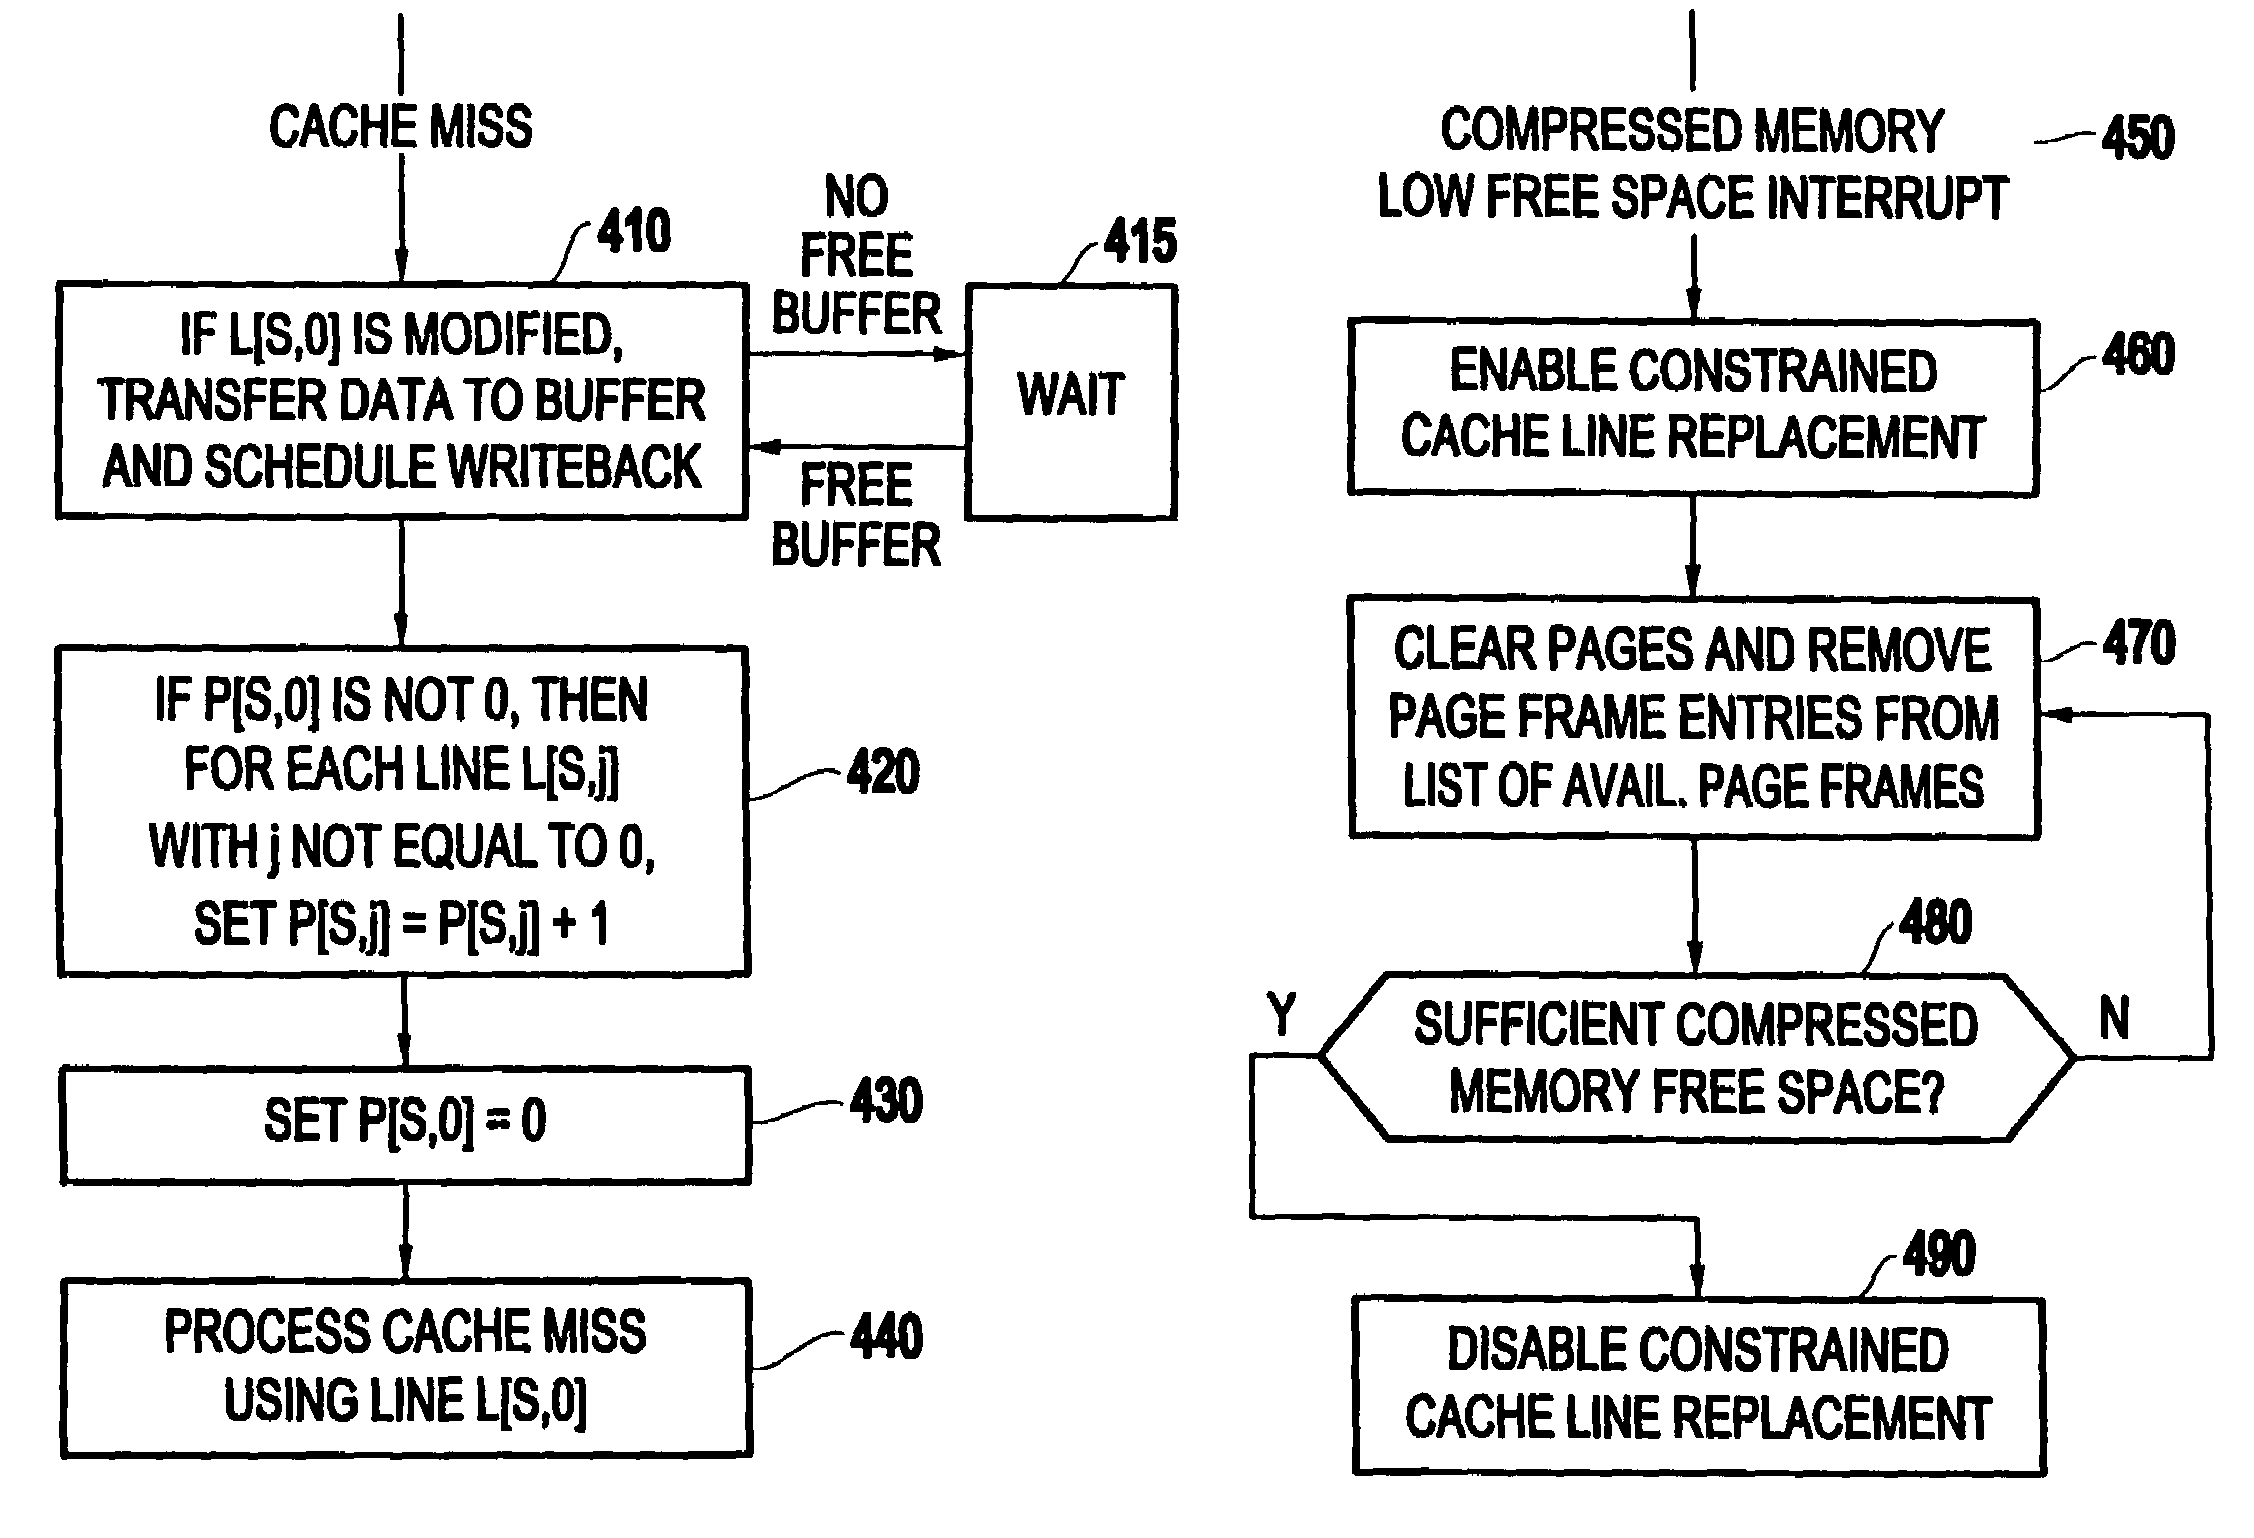 Cache configuration for compressed memory systems